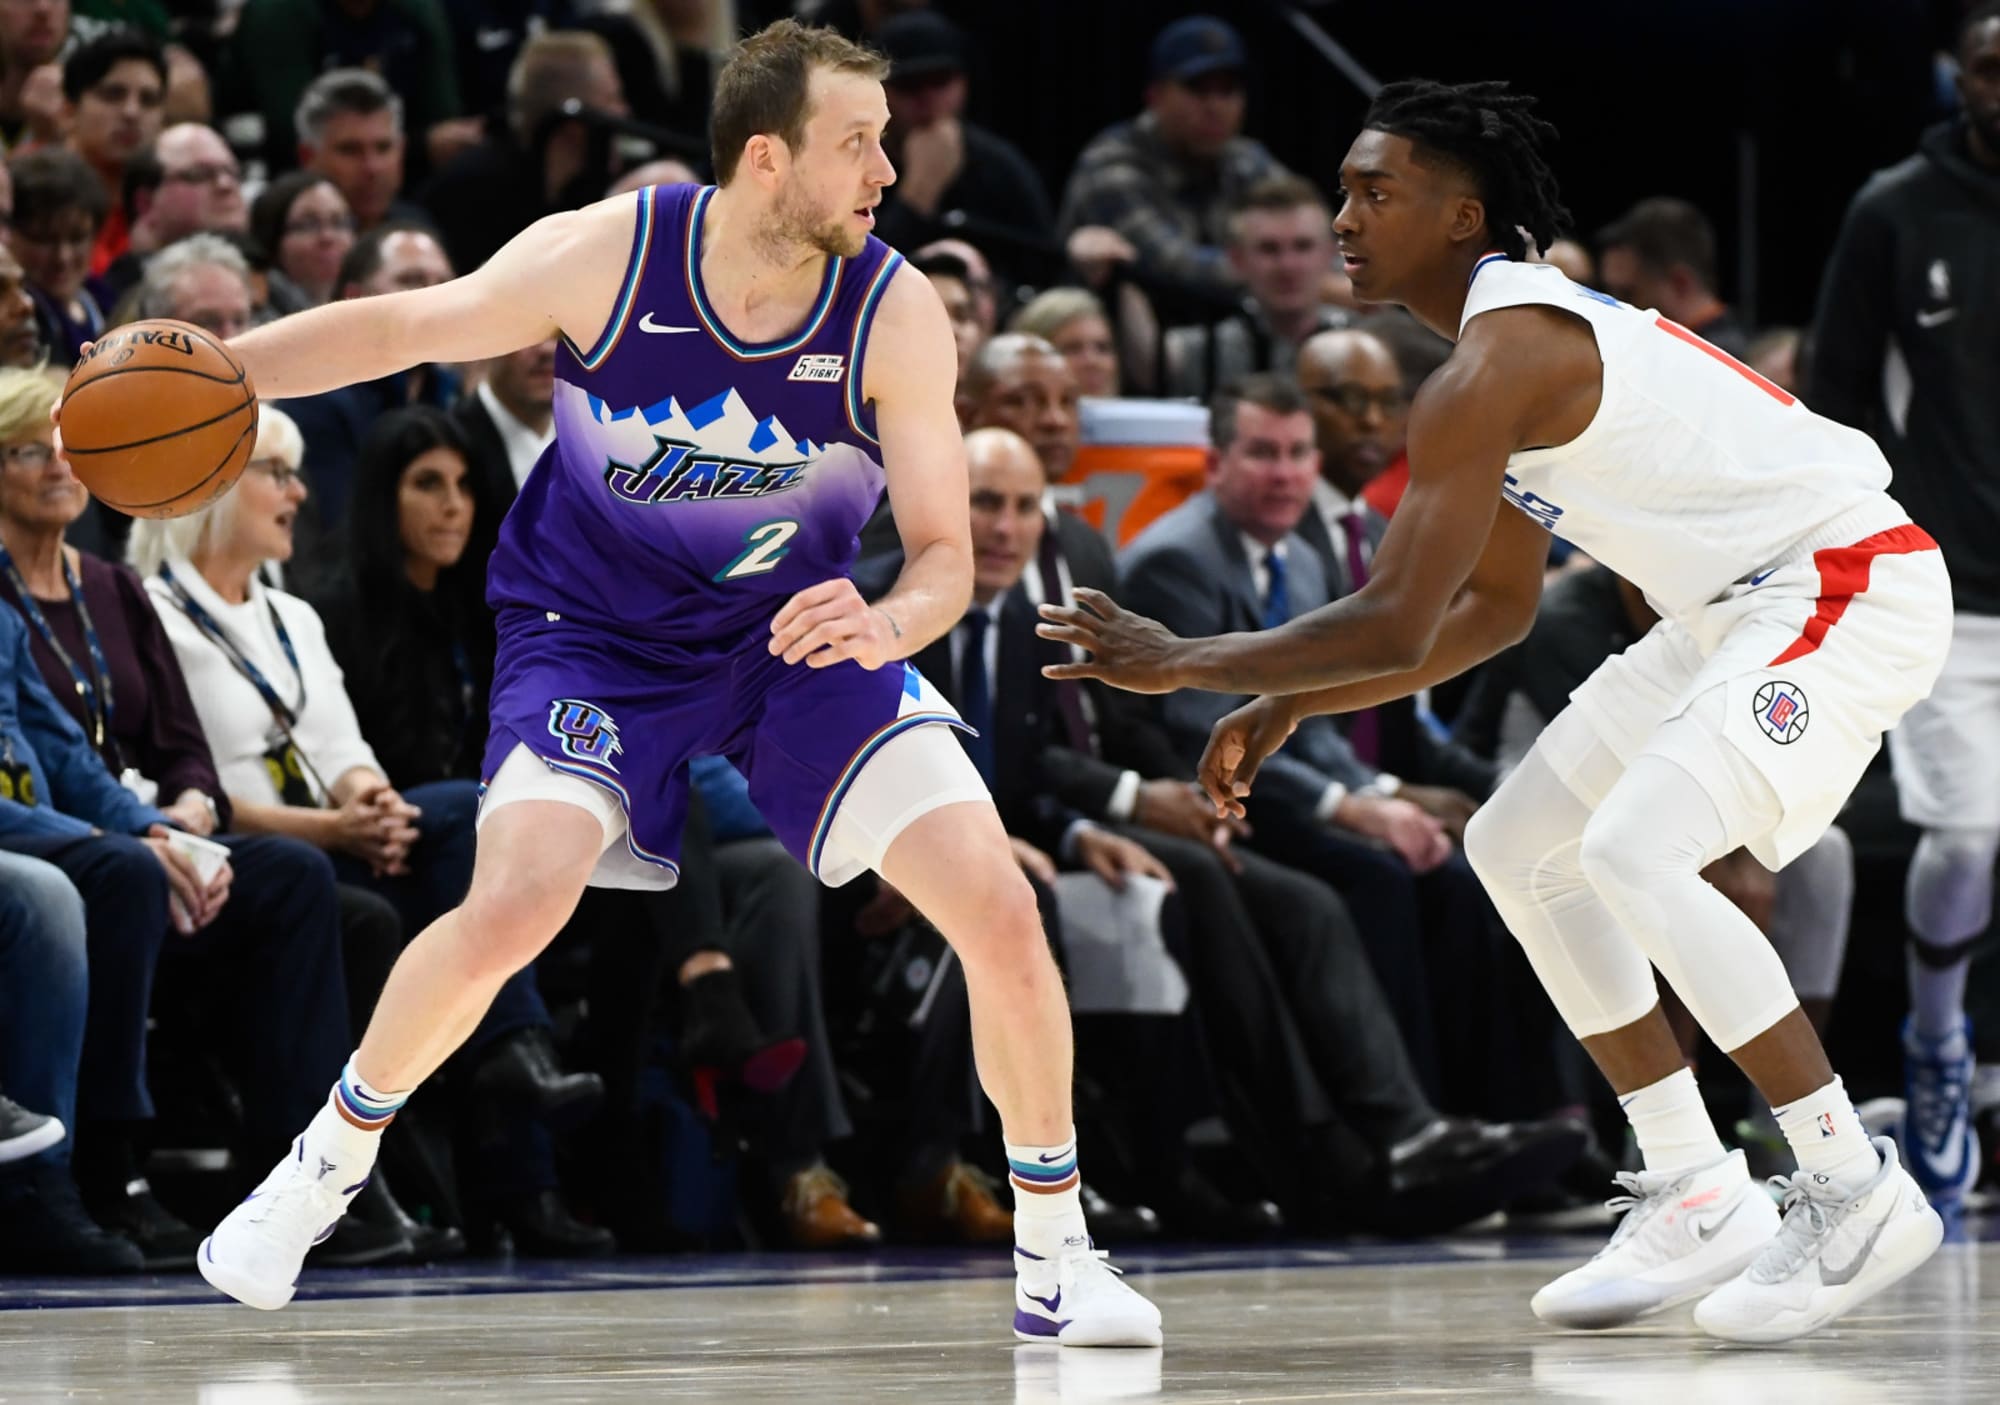 Orlando Magic must give Joe Ingles minutes, include him in rotation